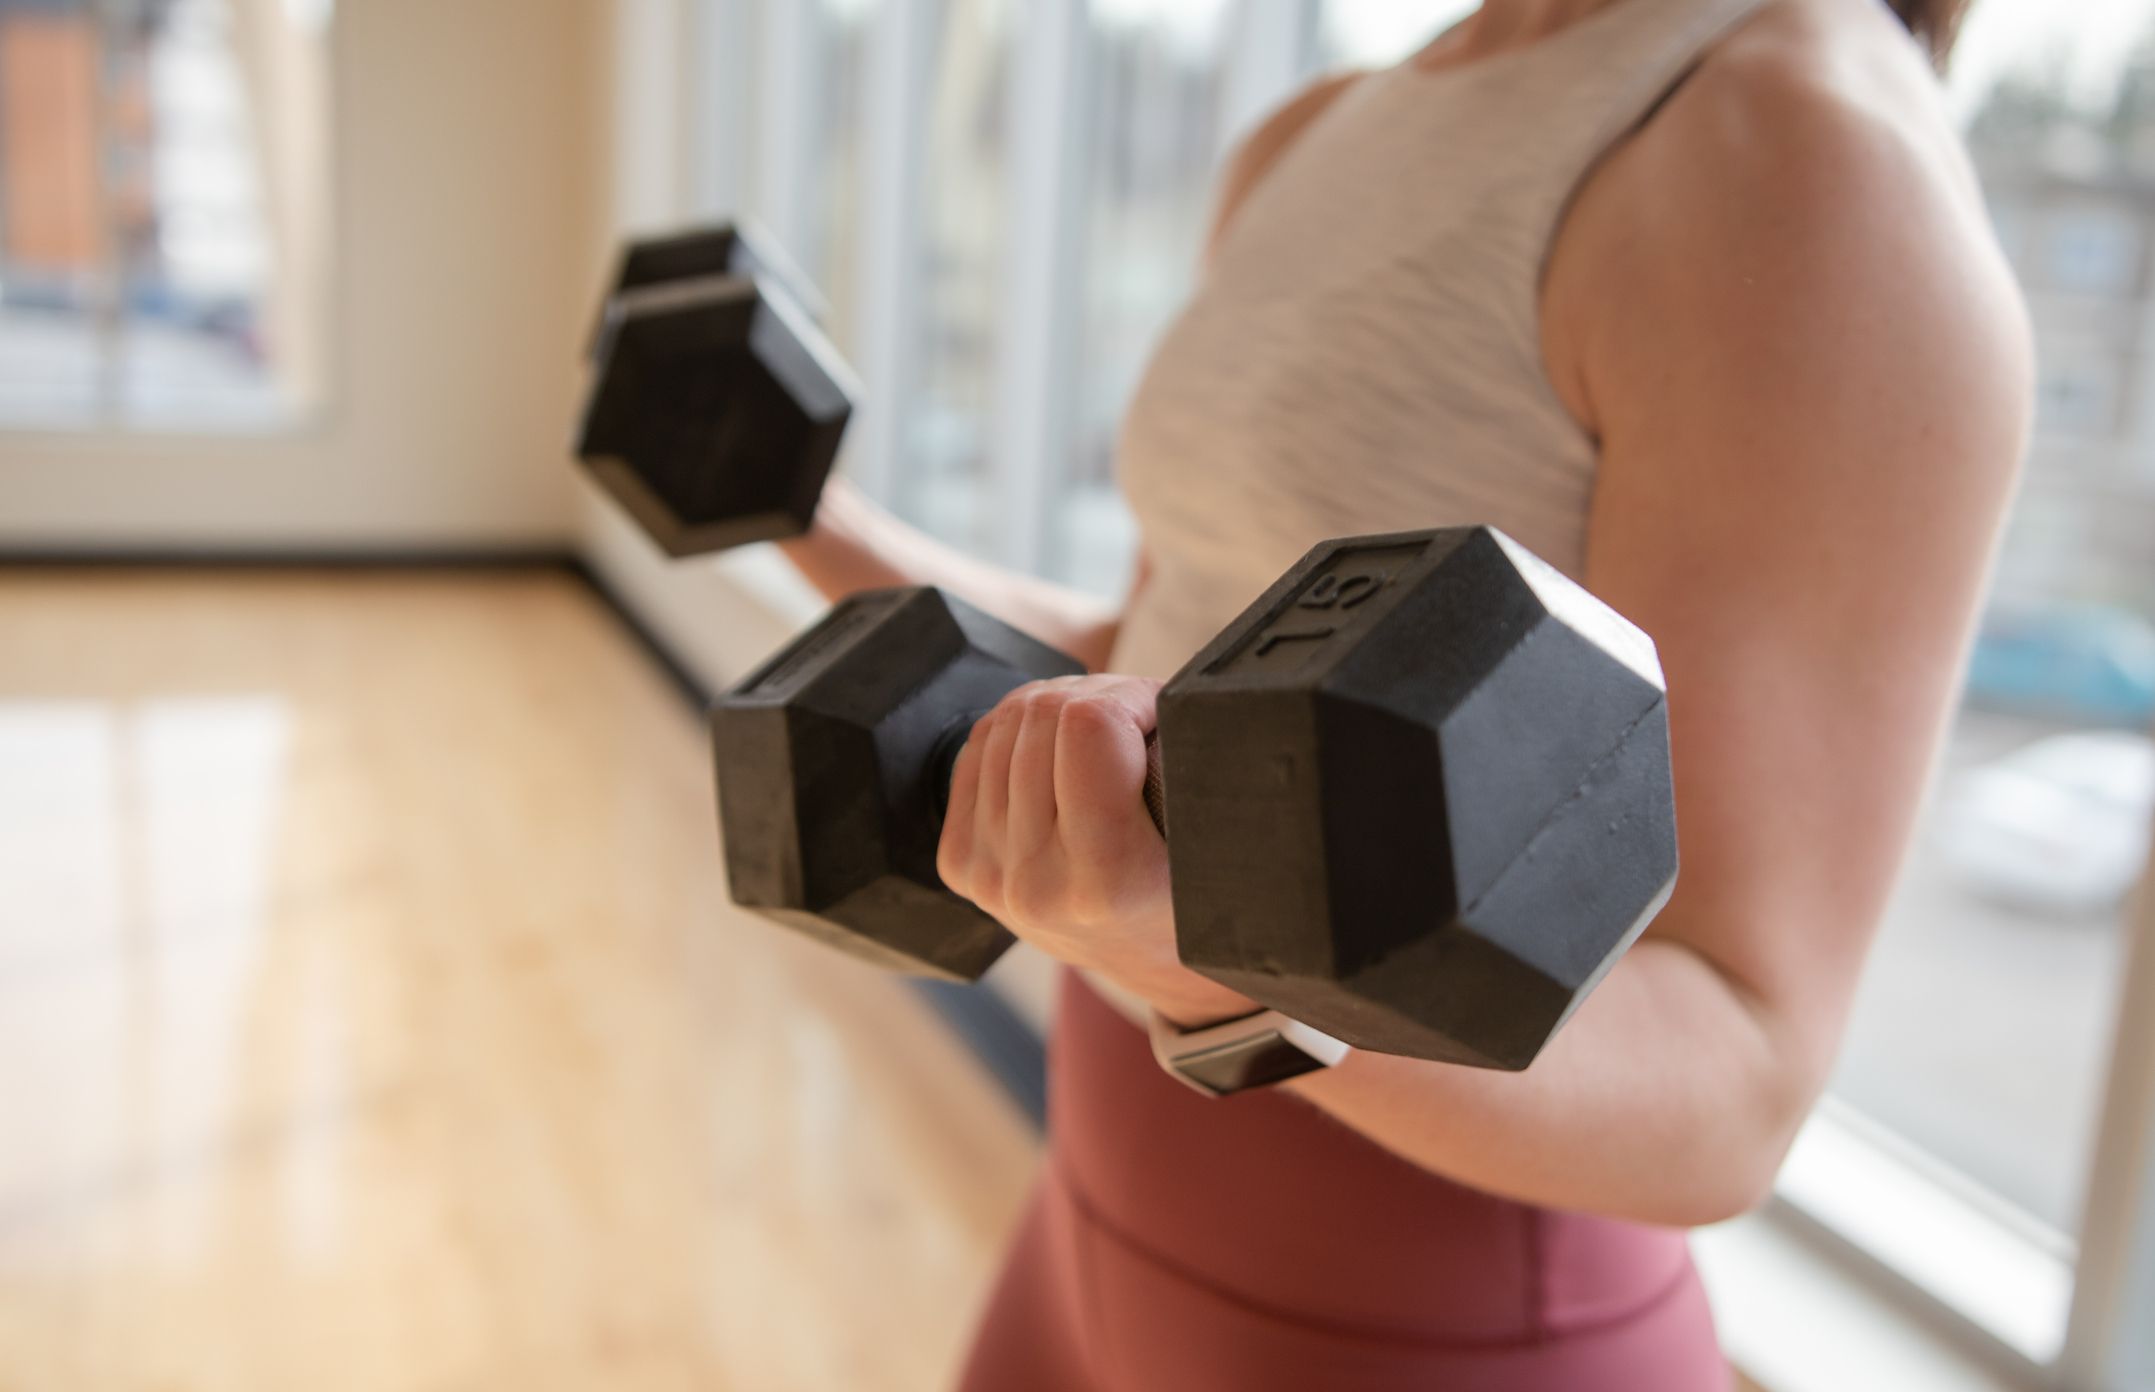 https://hips.hearstapps.com/hmg-prod/images/low-section-of-woman-exercising-with-dumbbells-at-royalty-free-image-1647548948.jpg